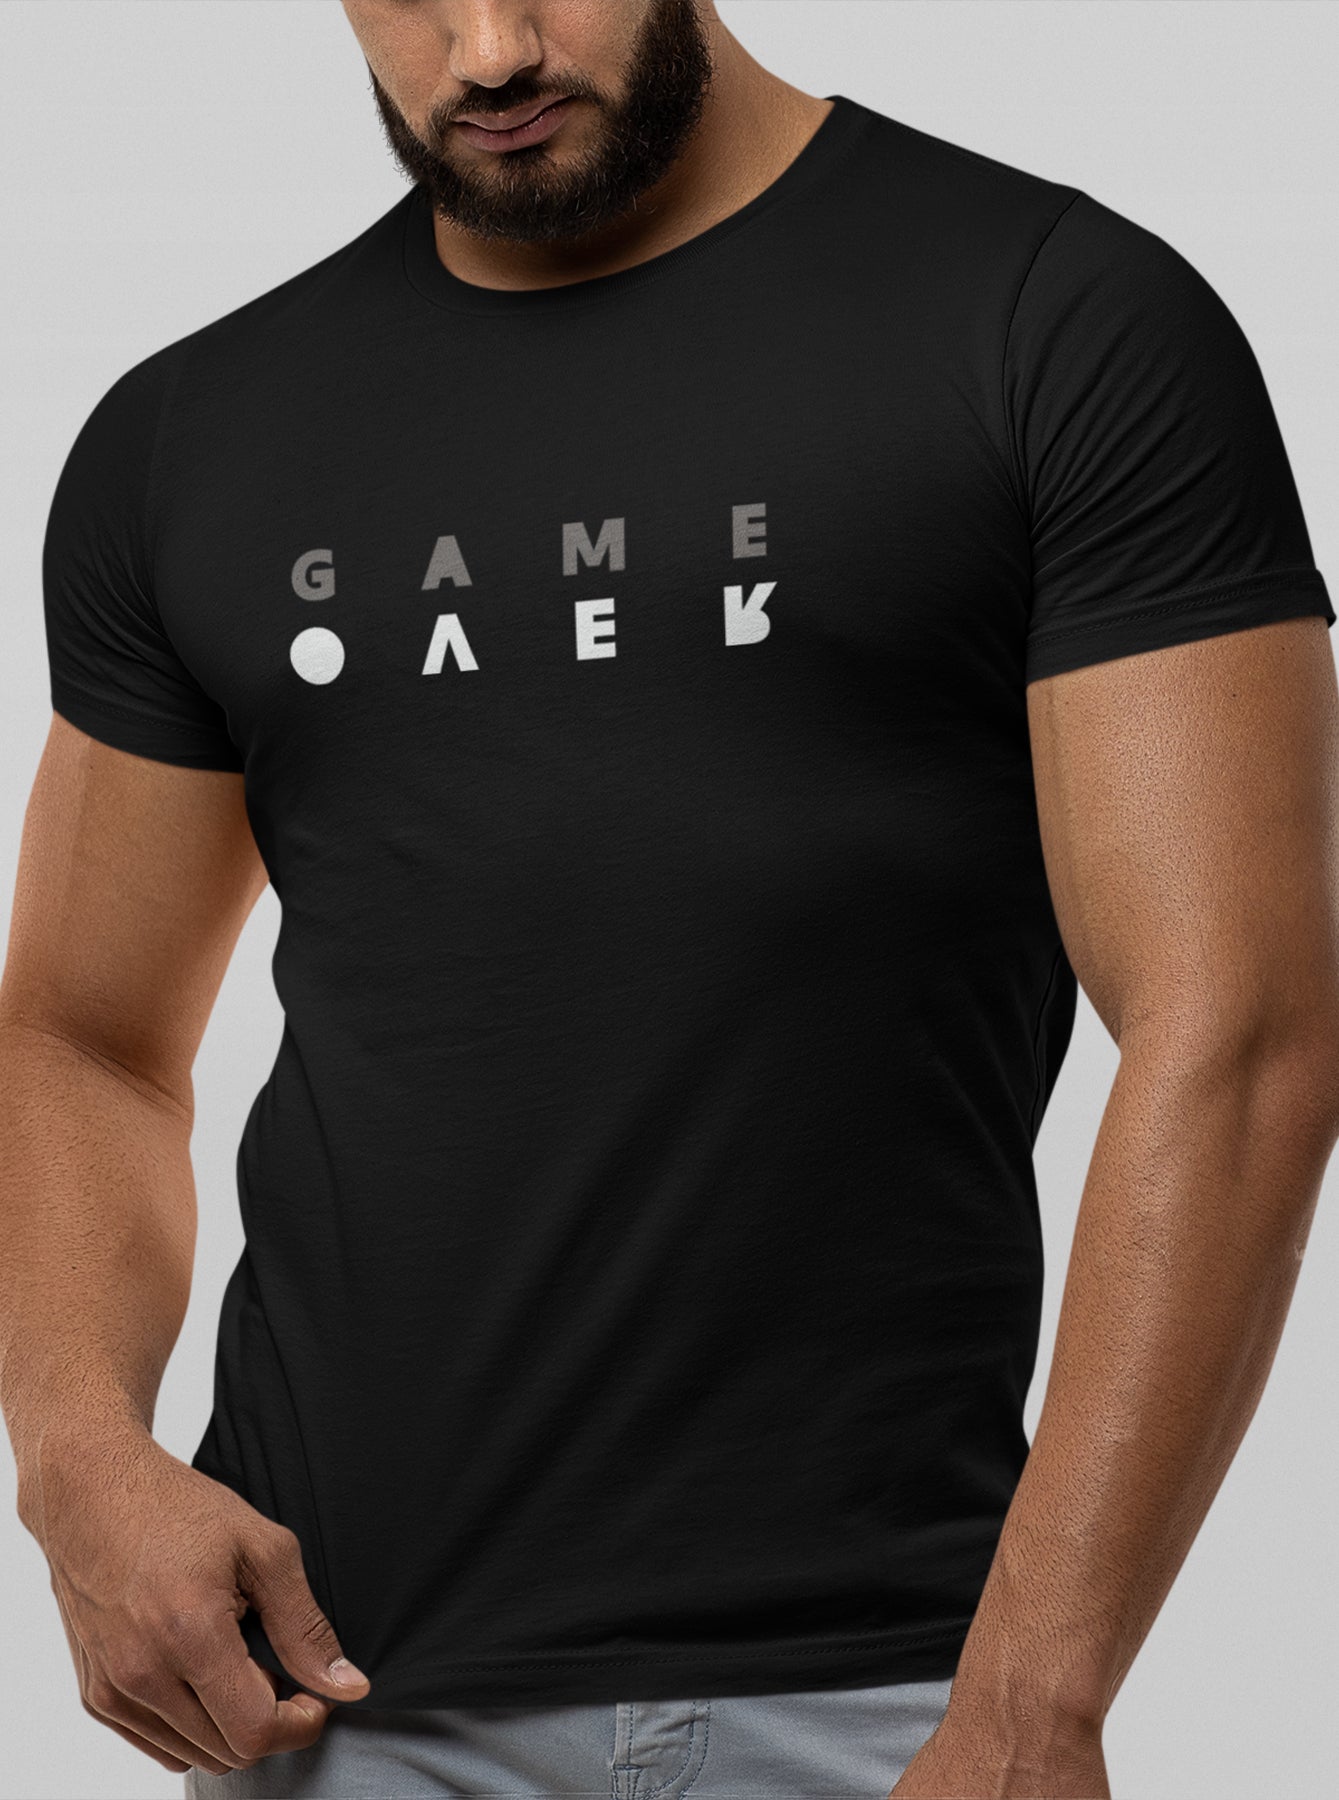 Game Over Tee